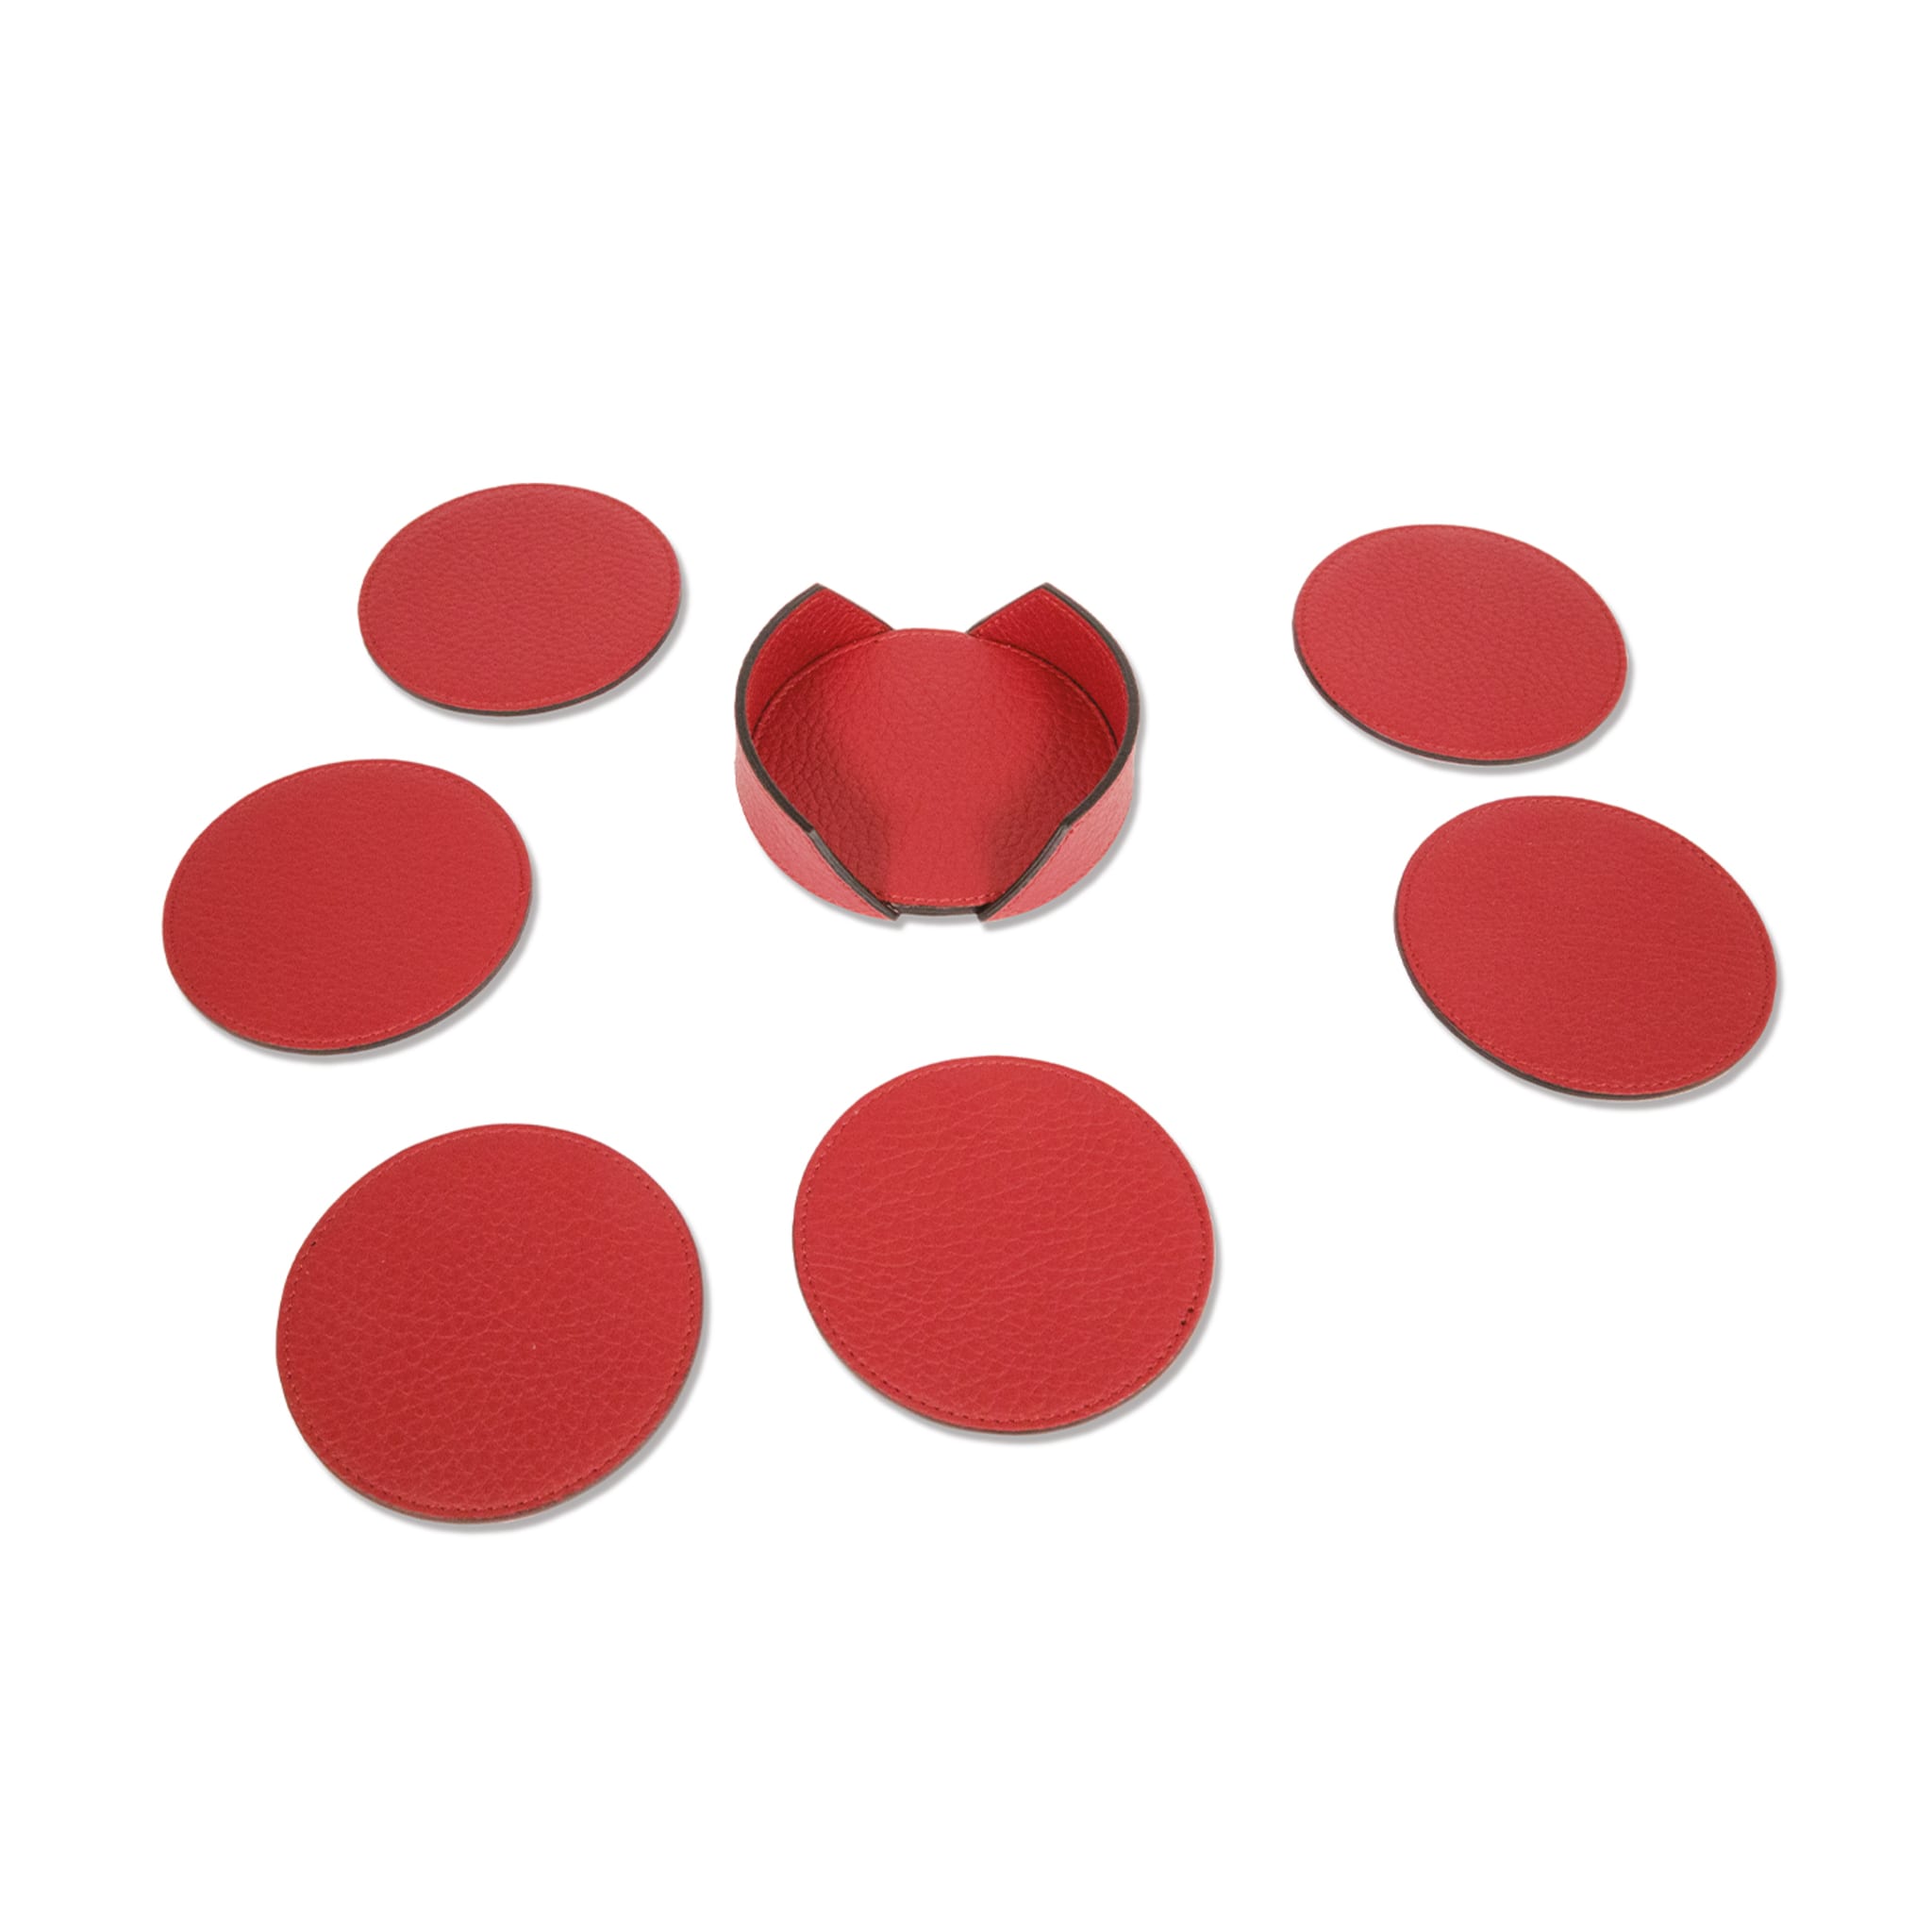 Wings Red Set of 6 Coasters - Alternative view 2